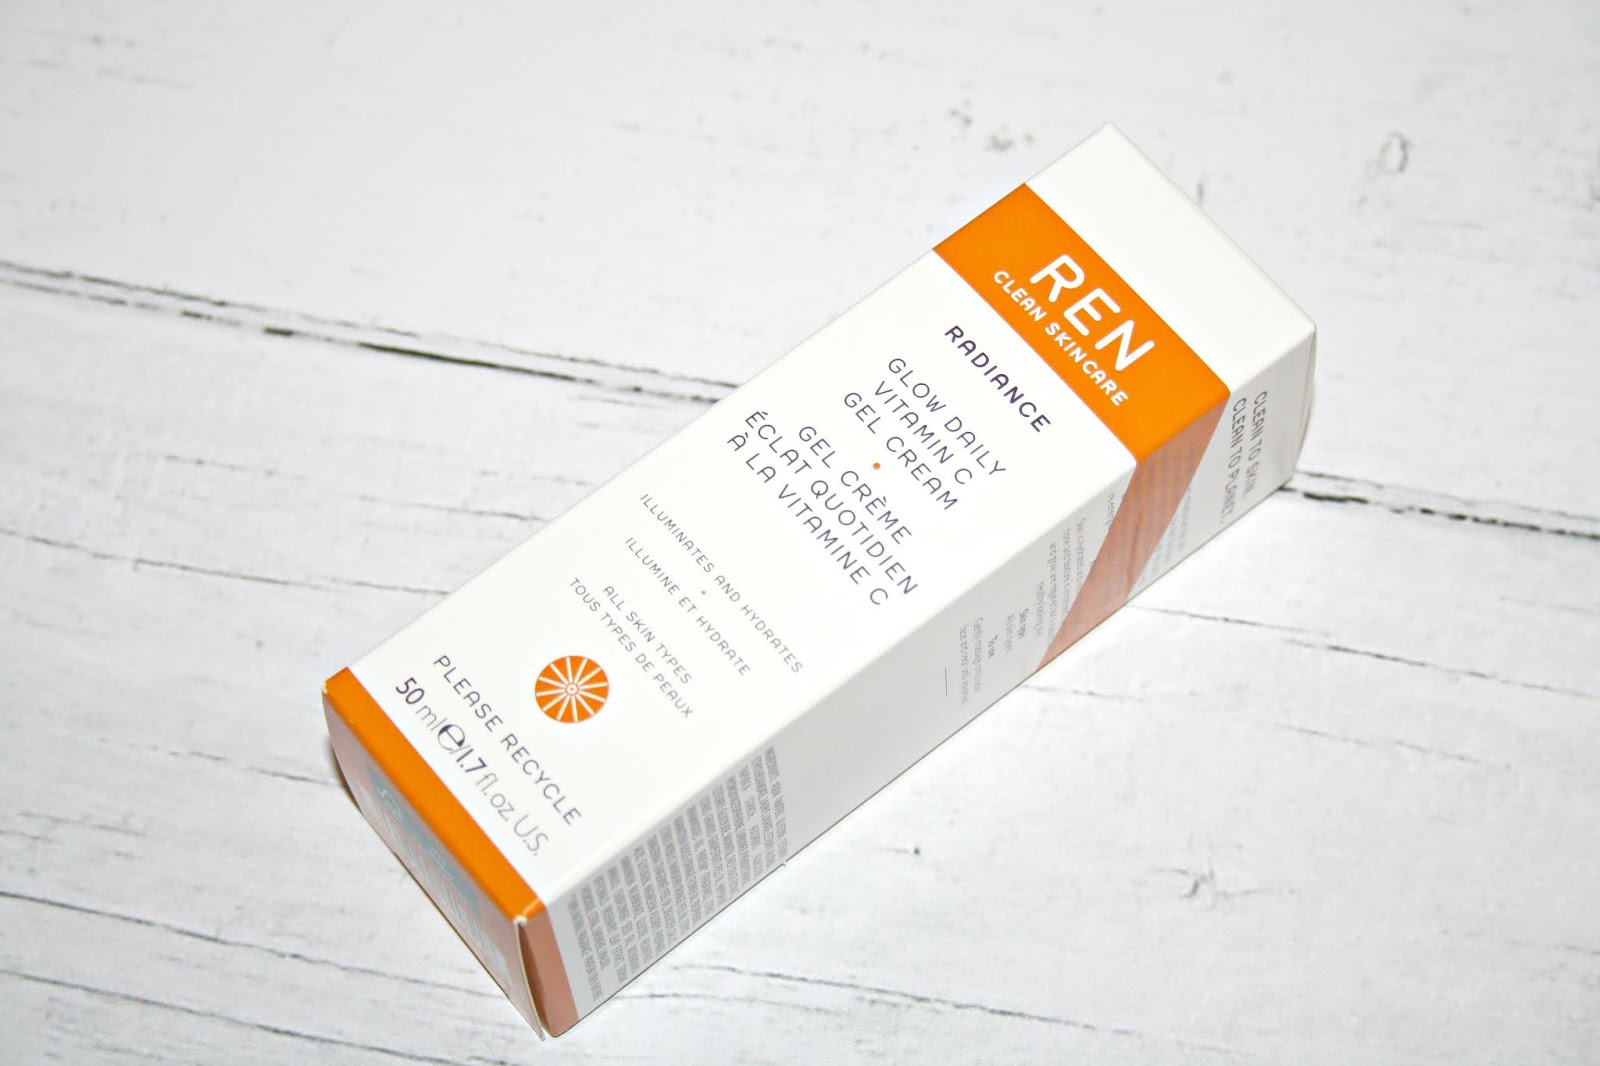 Beautyqueenuk A Uk Beauty And Lifestyle Blog Ren Clean Skincare Radiance Glow Daily Vitamin C Gel Cream